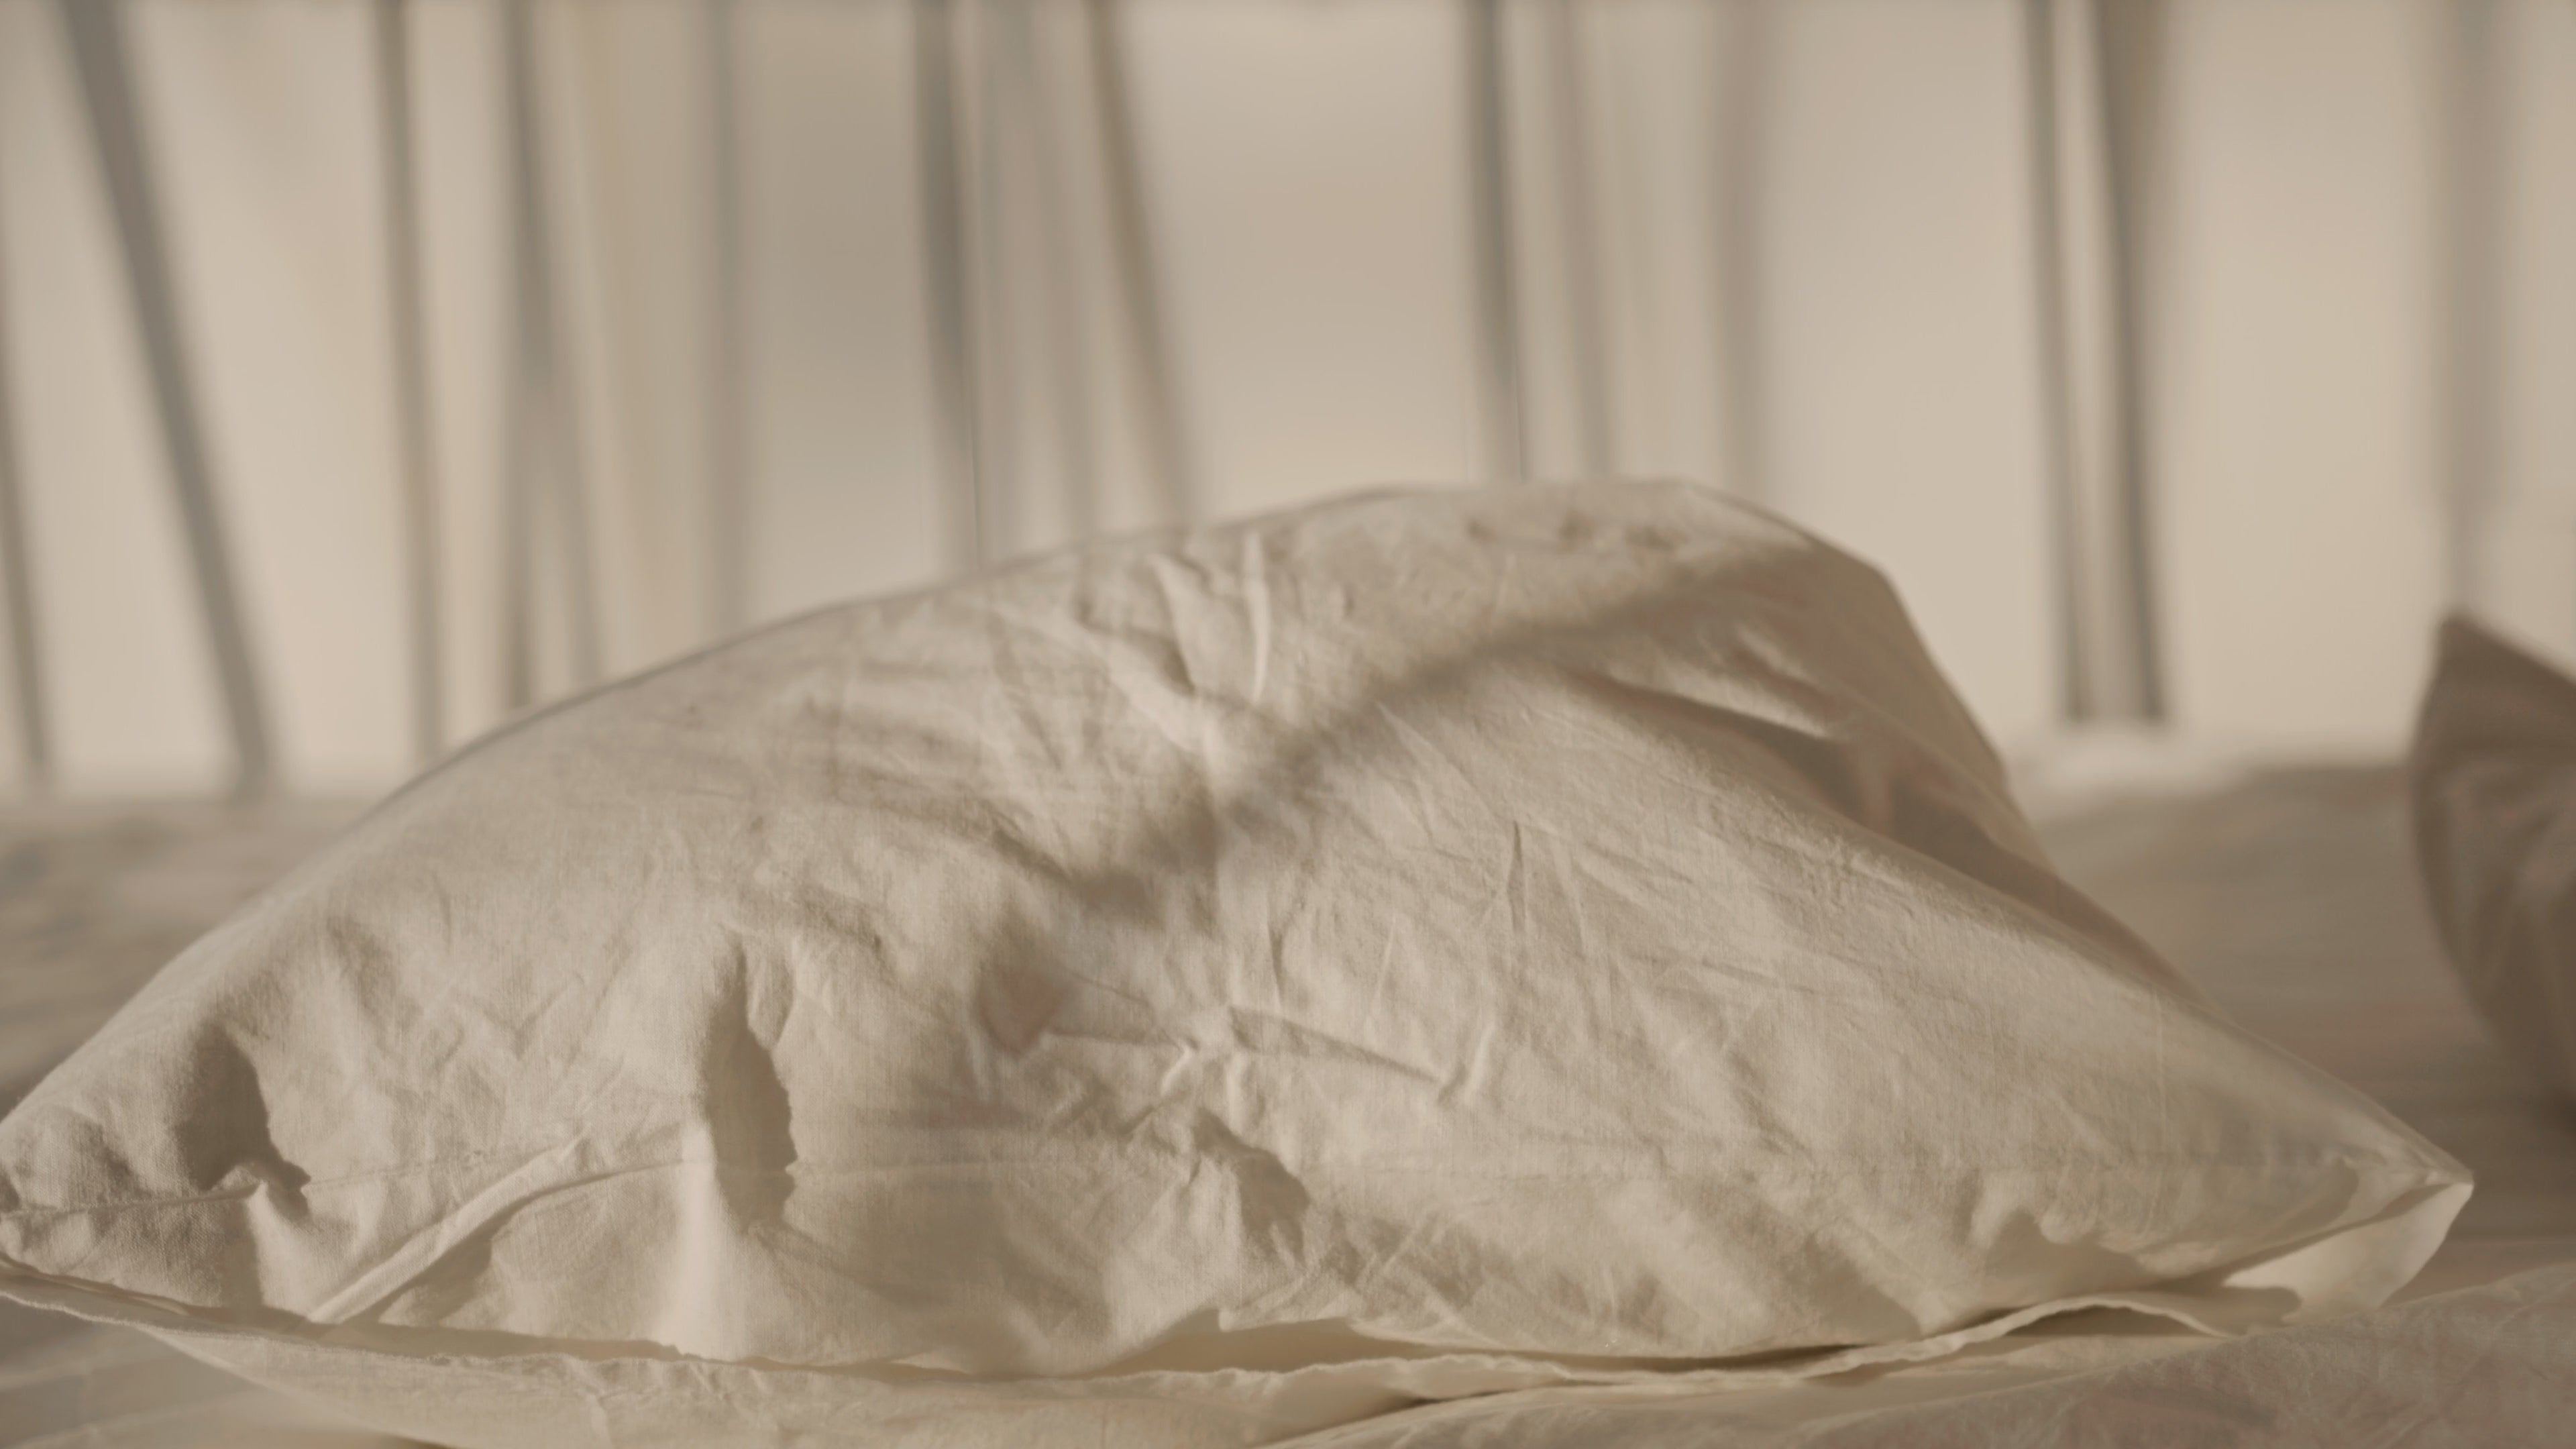 Load video: Video Showing Pillows on a Linen Bed